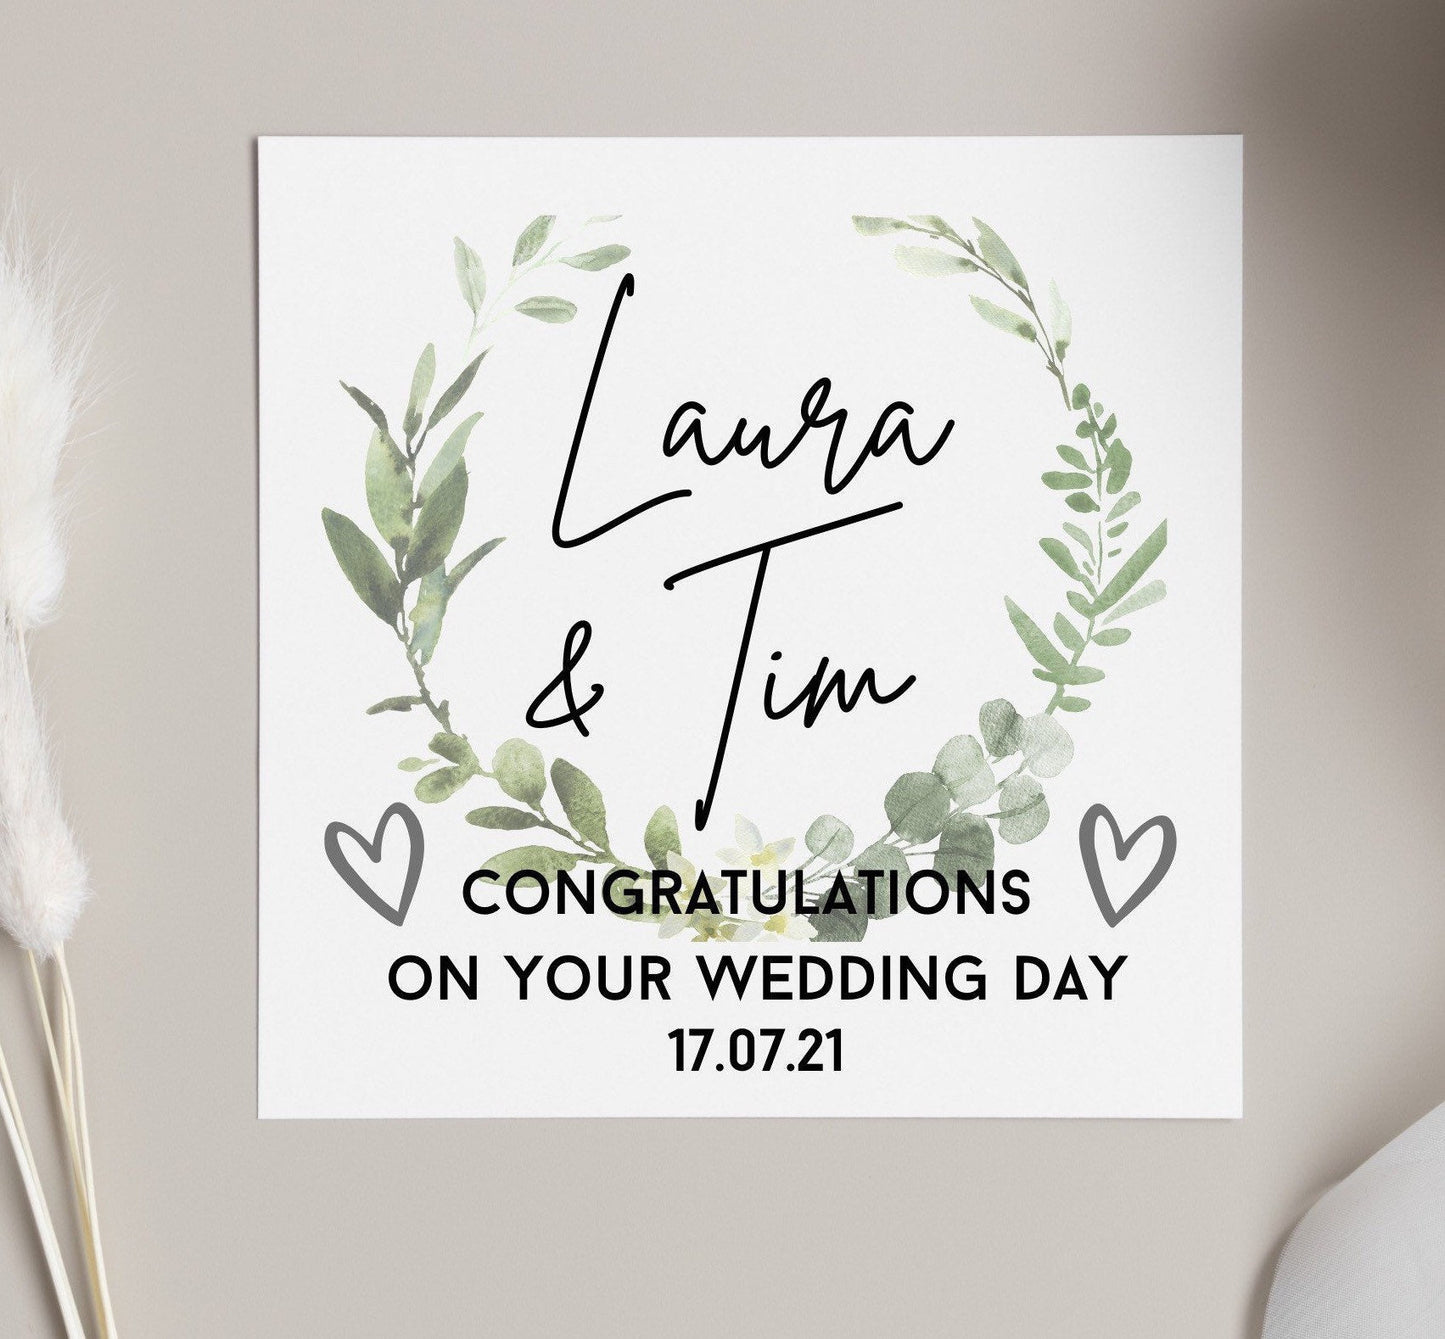 Congratulations on your wedding day card, personalised wedding cards for newlyweds, mr and Mrs wedding day card, eucalyptus wedding decor